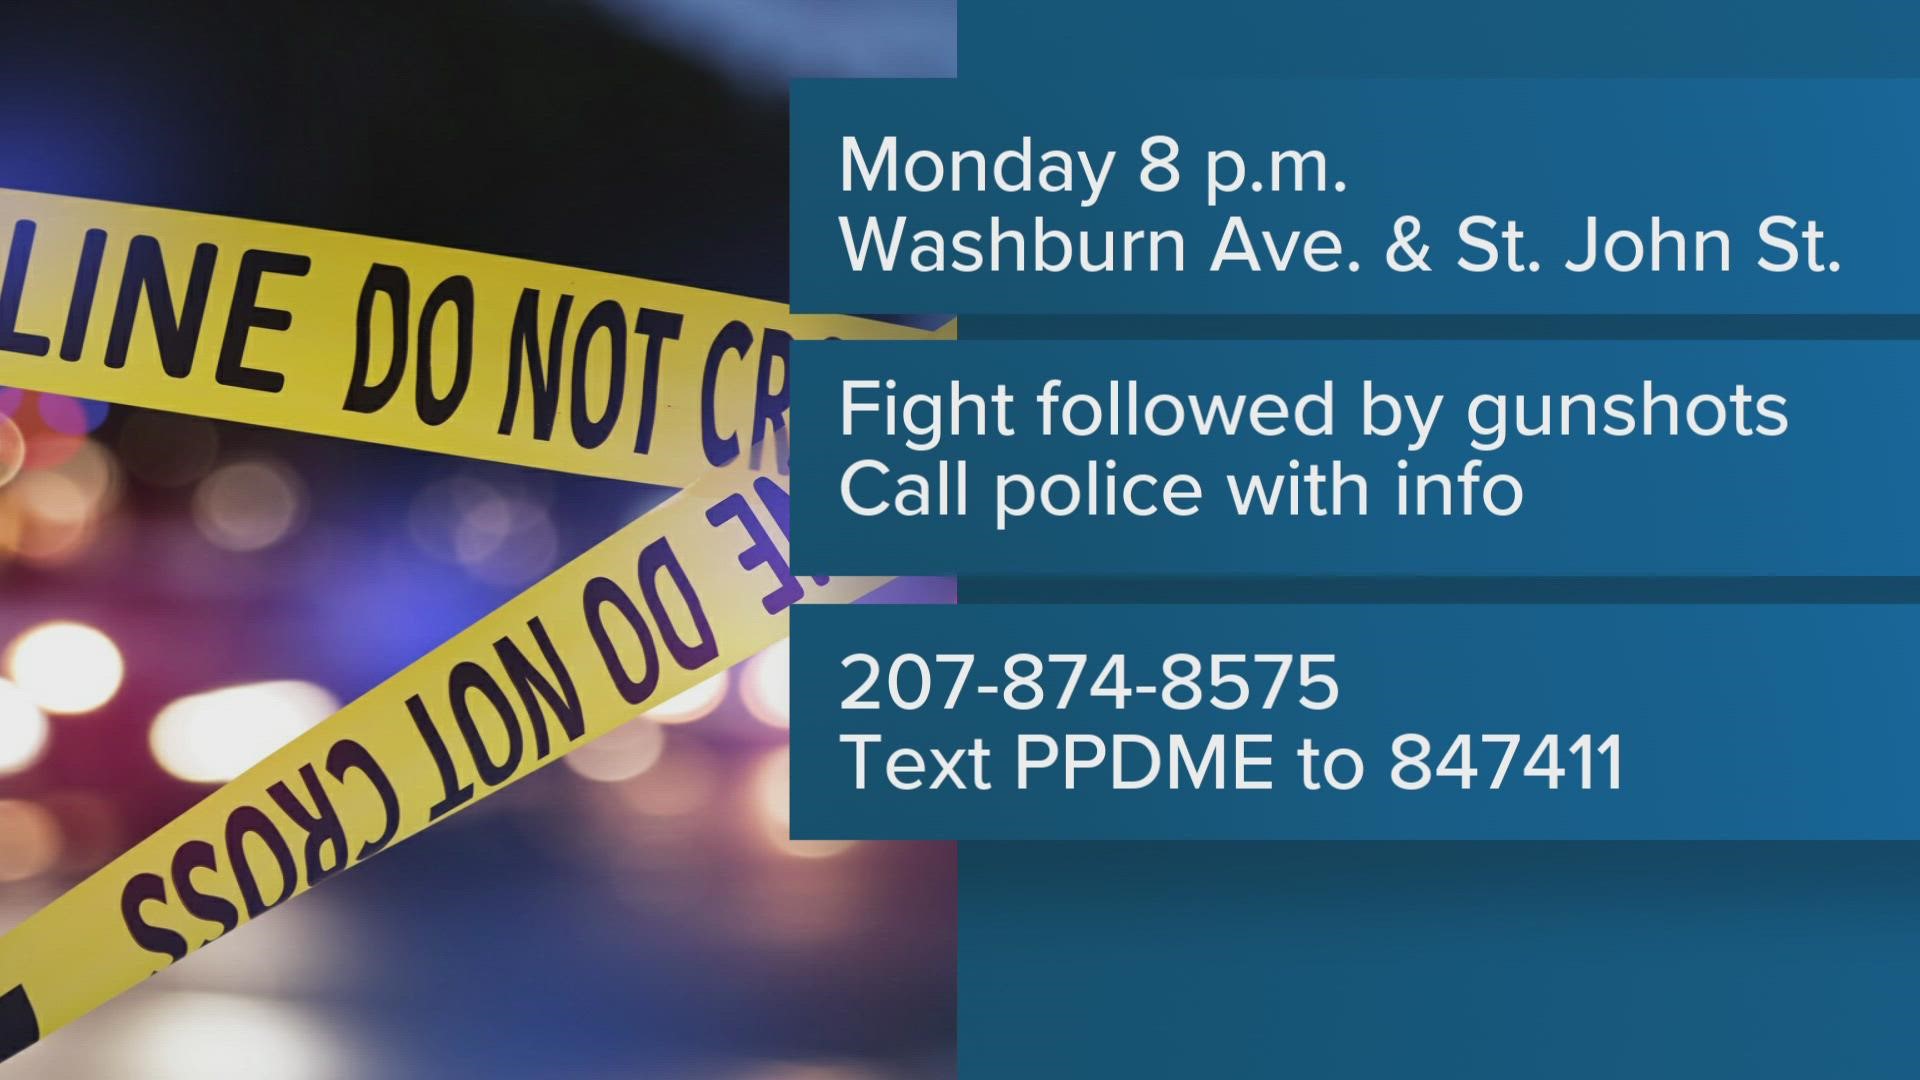 Officers responded to Washburn Avenue, in the area of St. John Street, around 8 p.m. for a report of "an altercation followed by the sound of gunshots."